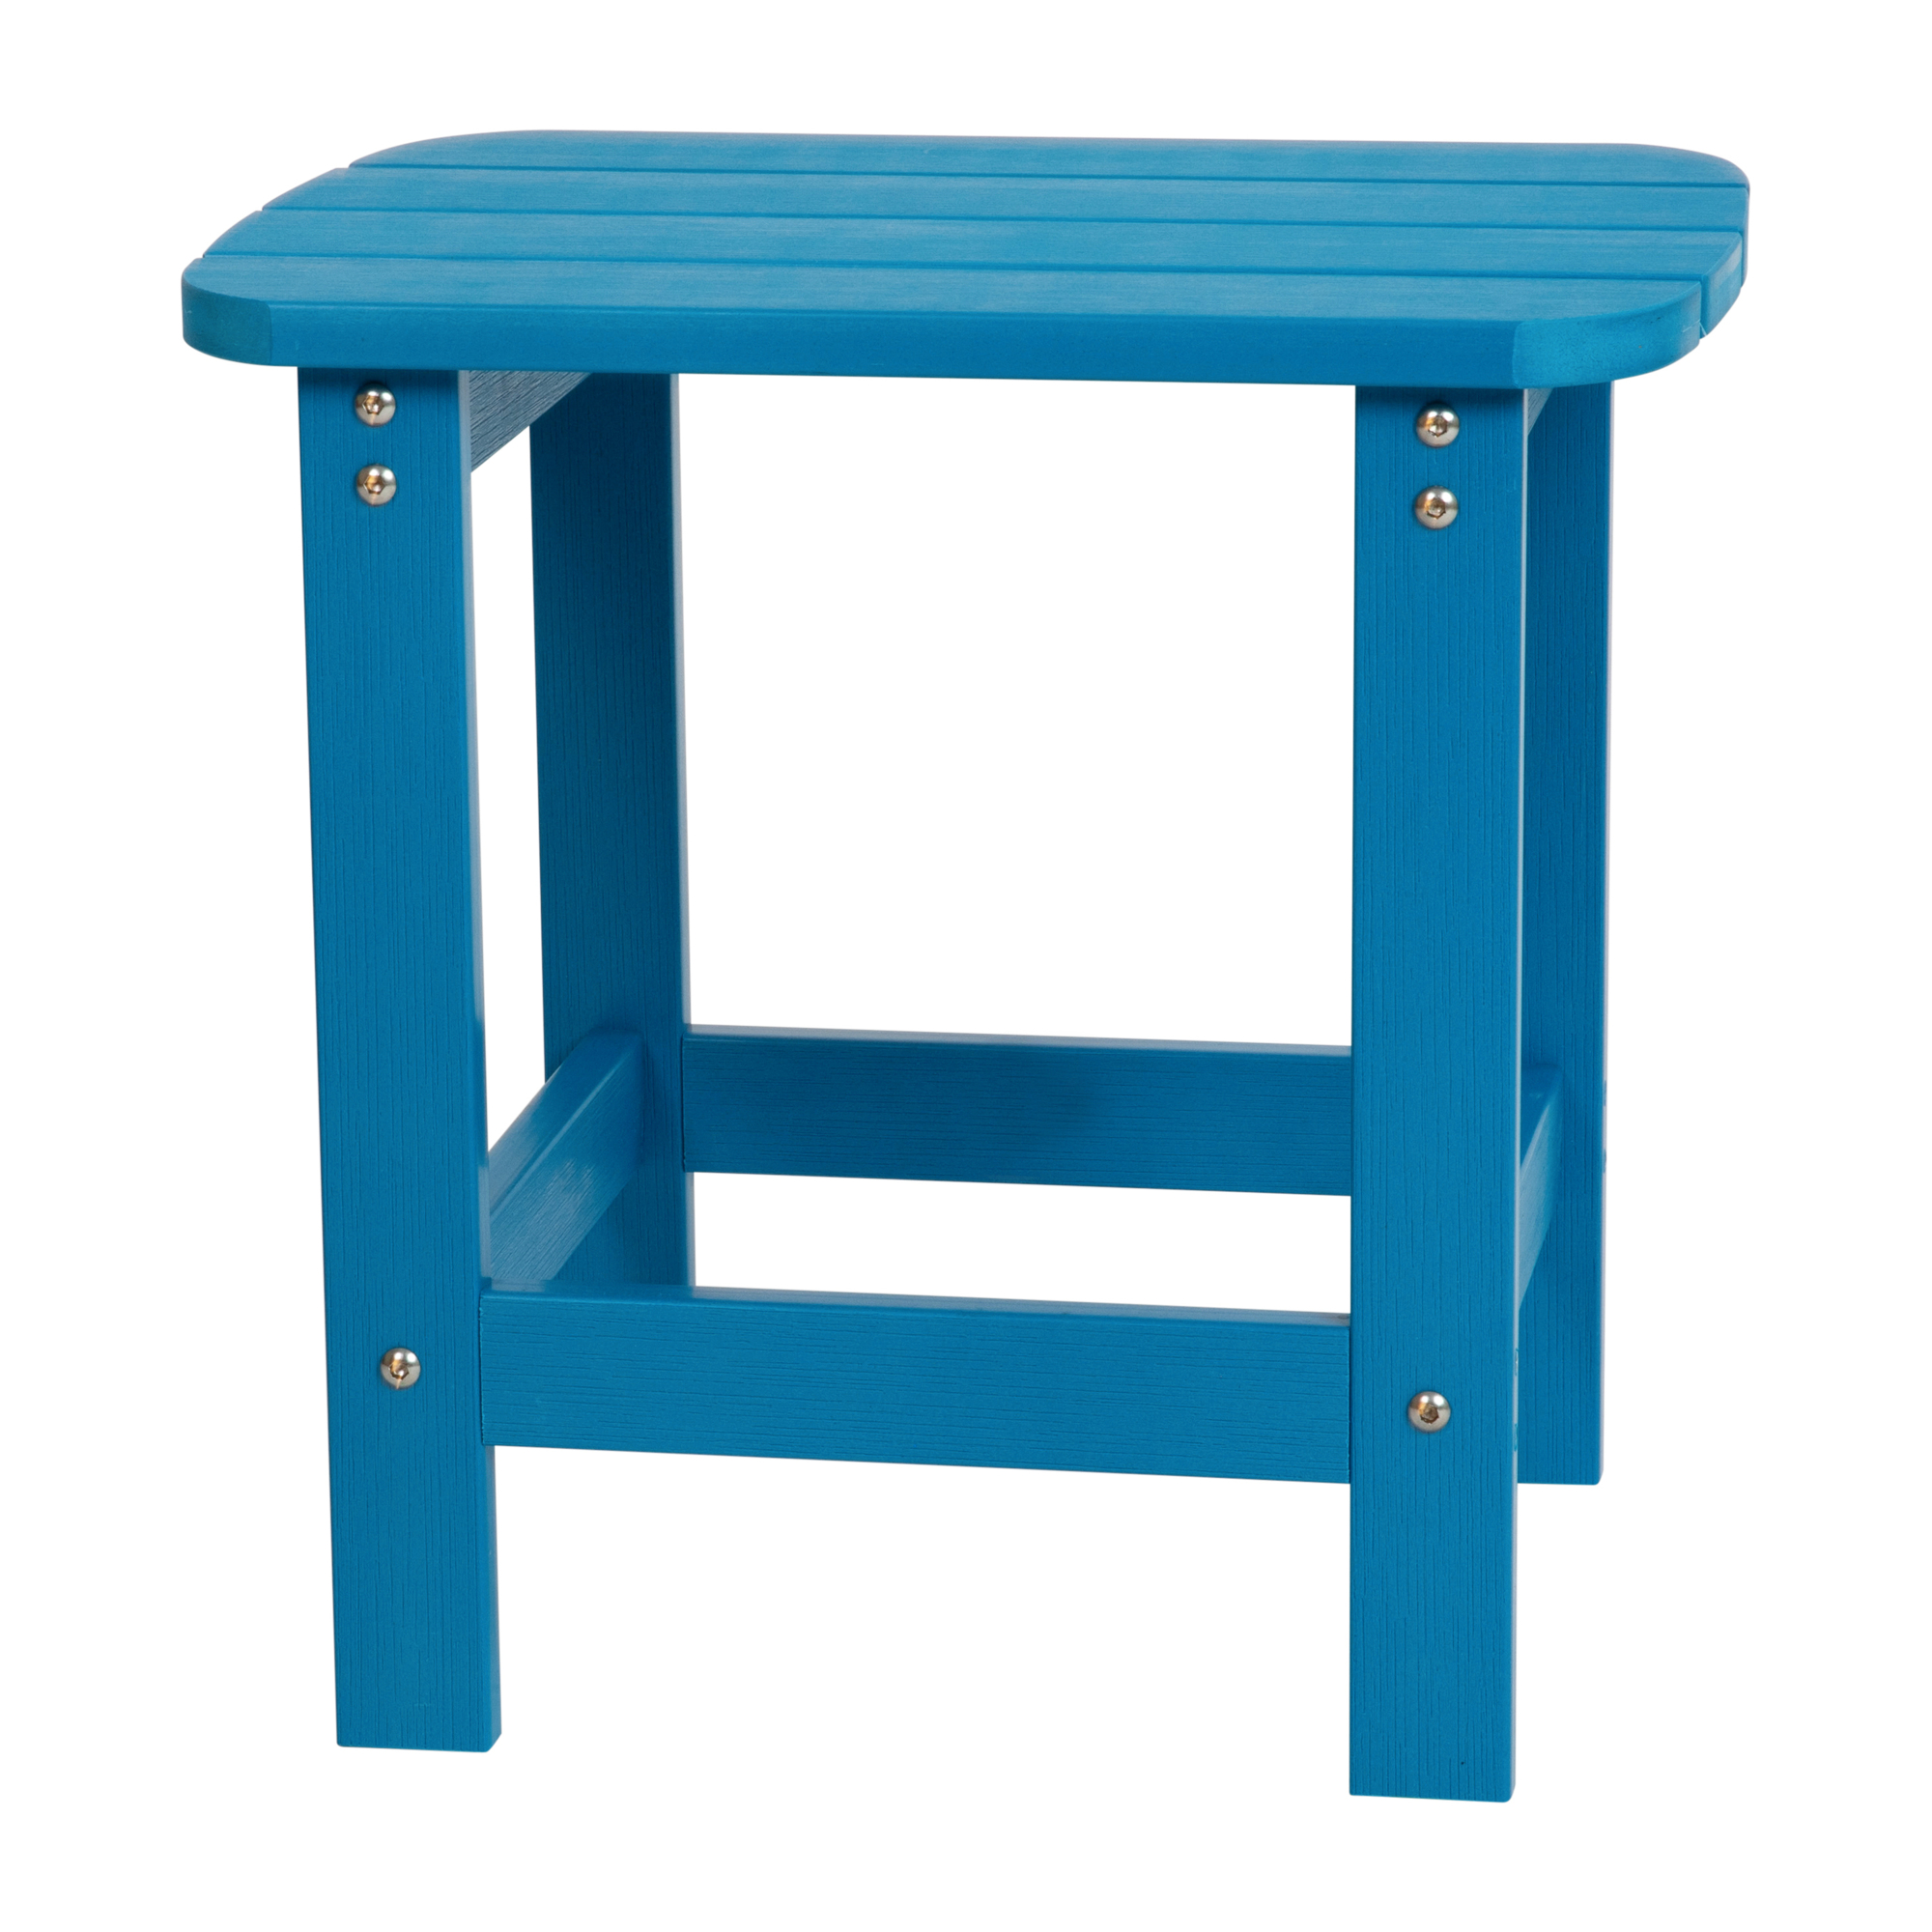 Flash Furniture, Blue All-Weather Adirondack Side Table, Table Shape Rectangle, Primary Color Blue, Height 18.25 in, Model JJT14001BLU